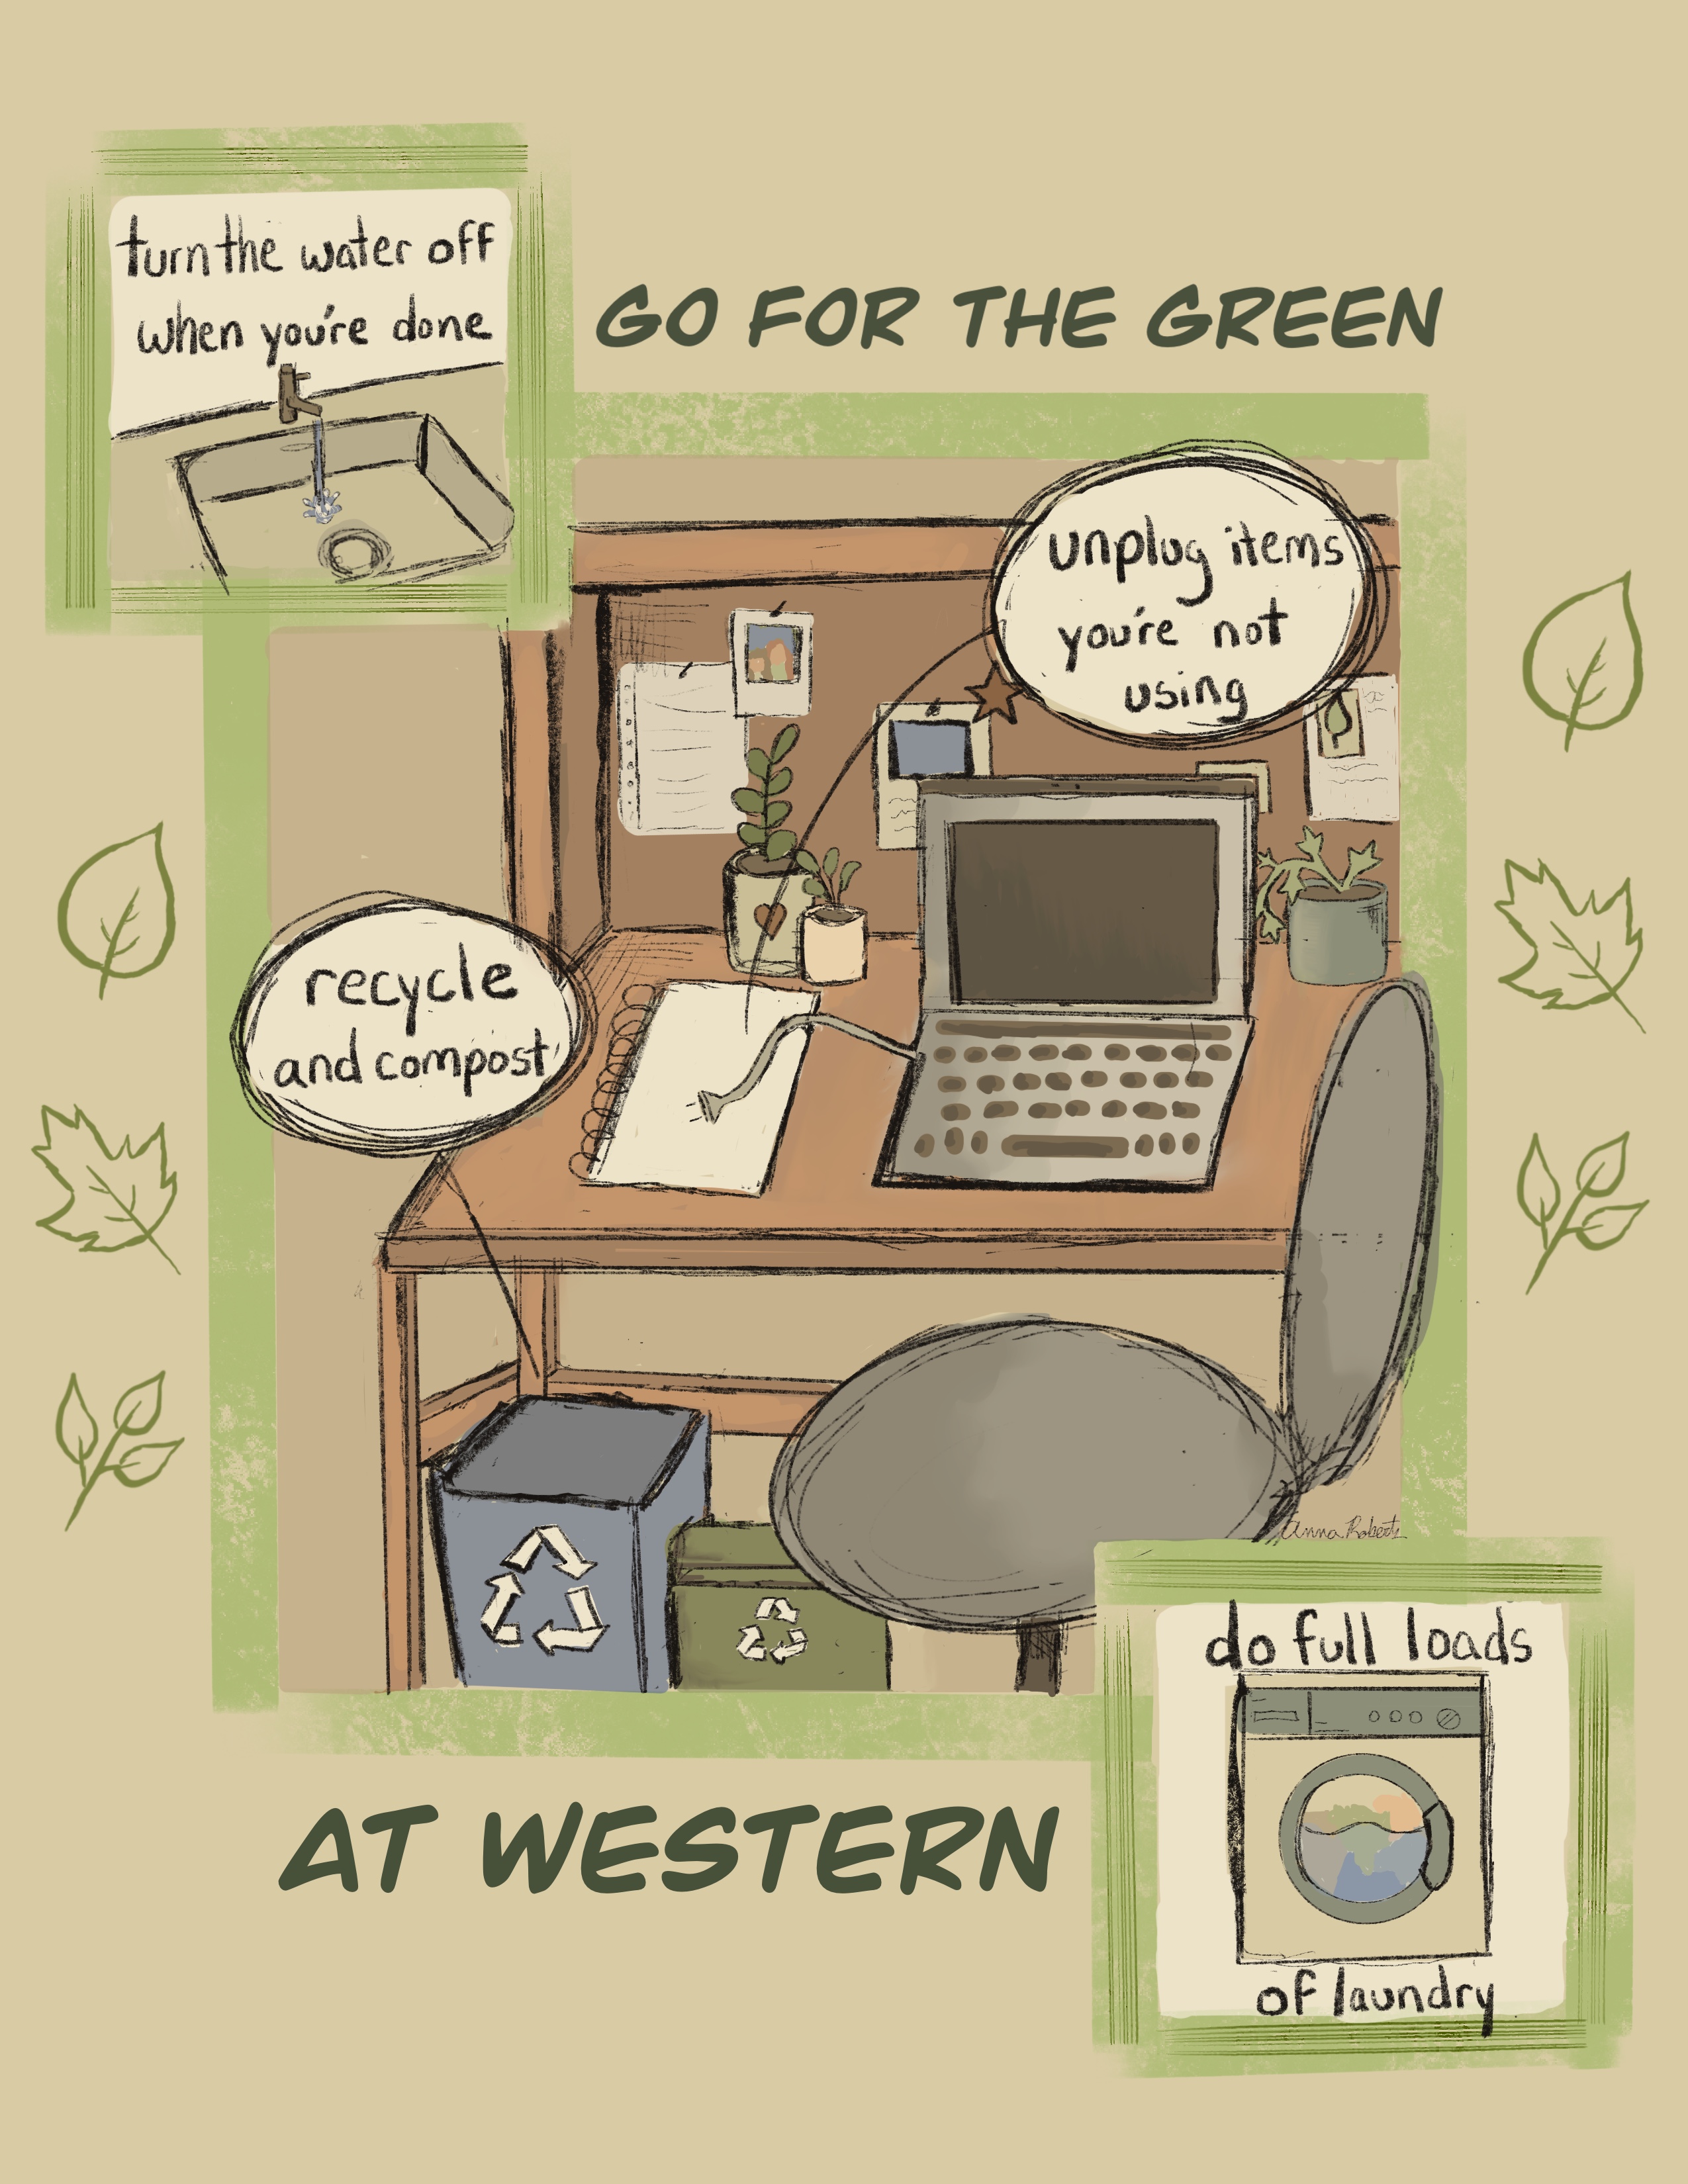 Go for the Green poster